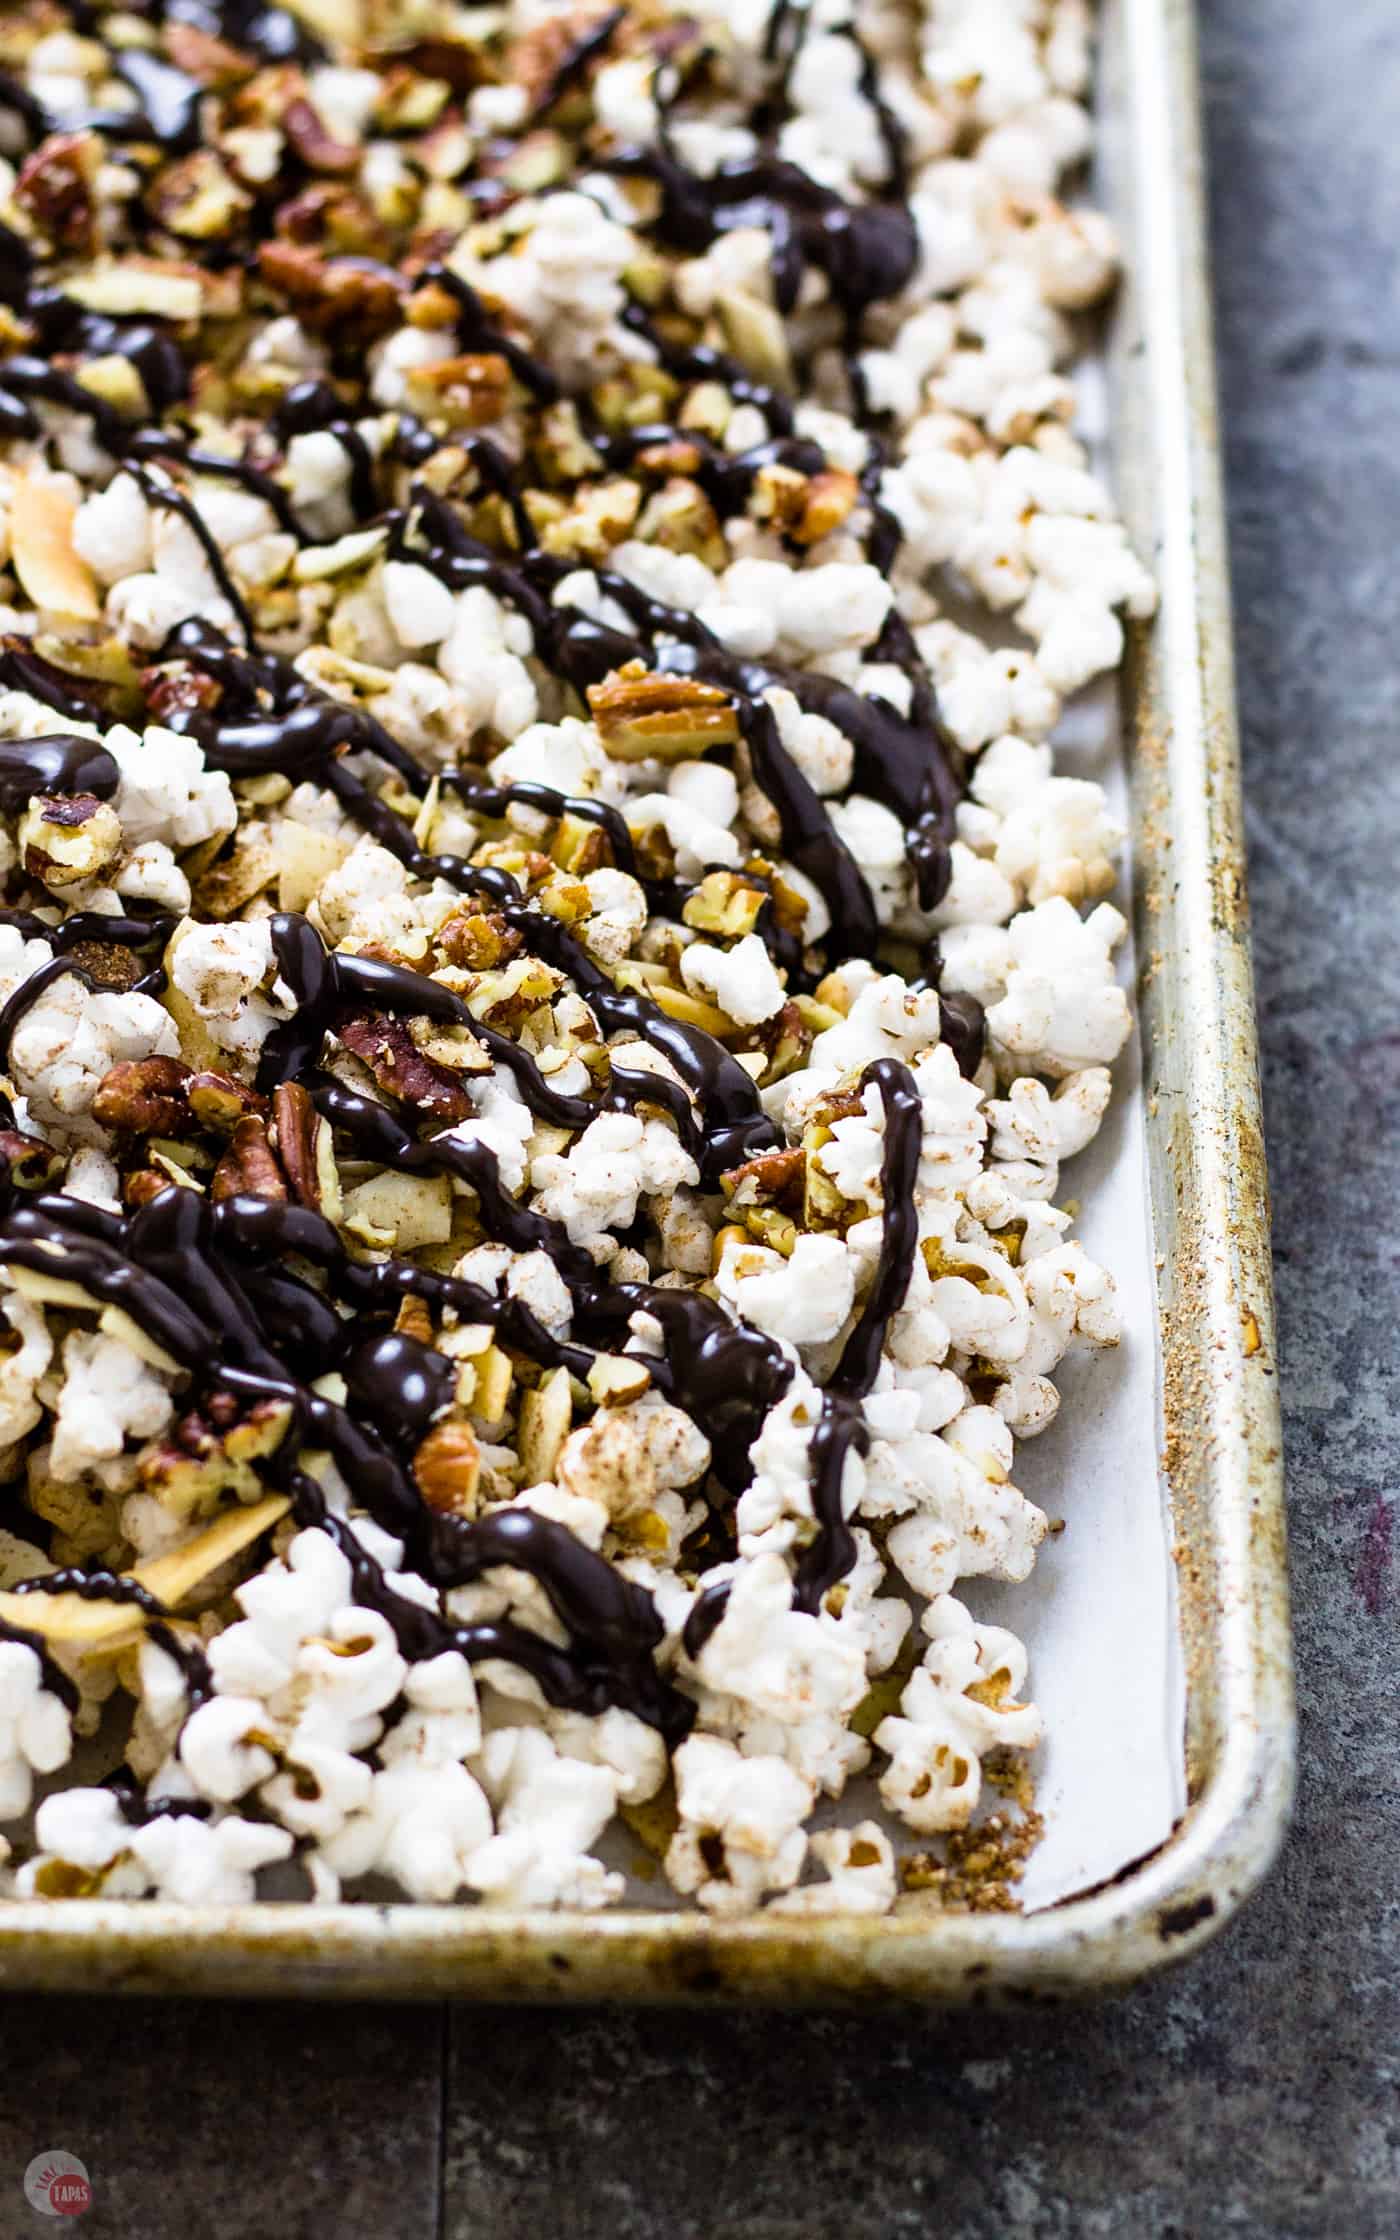 Toffee bits are a nice crunch in my German Chocolate Popcorn | Take Two Tapas